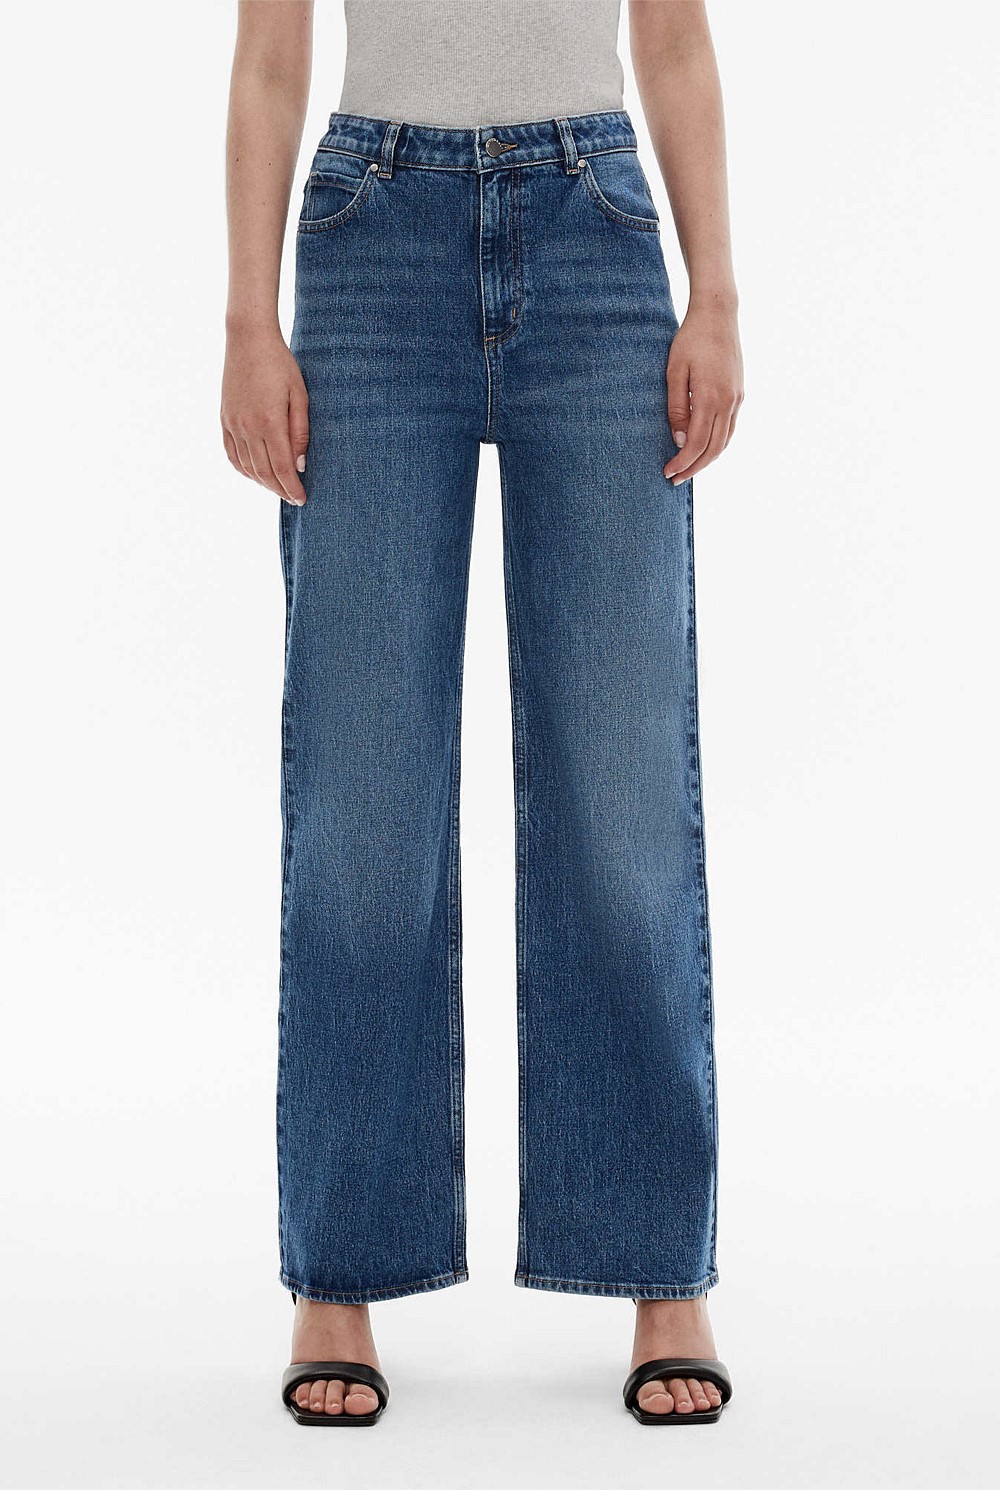 Relaxed Jeans - Women's Relaxed Fit Jeans Online - Witchery